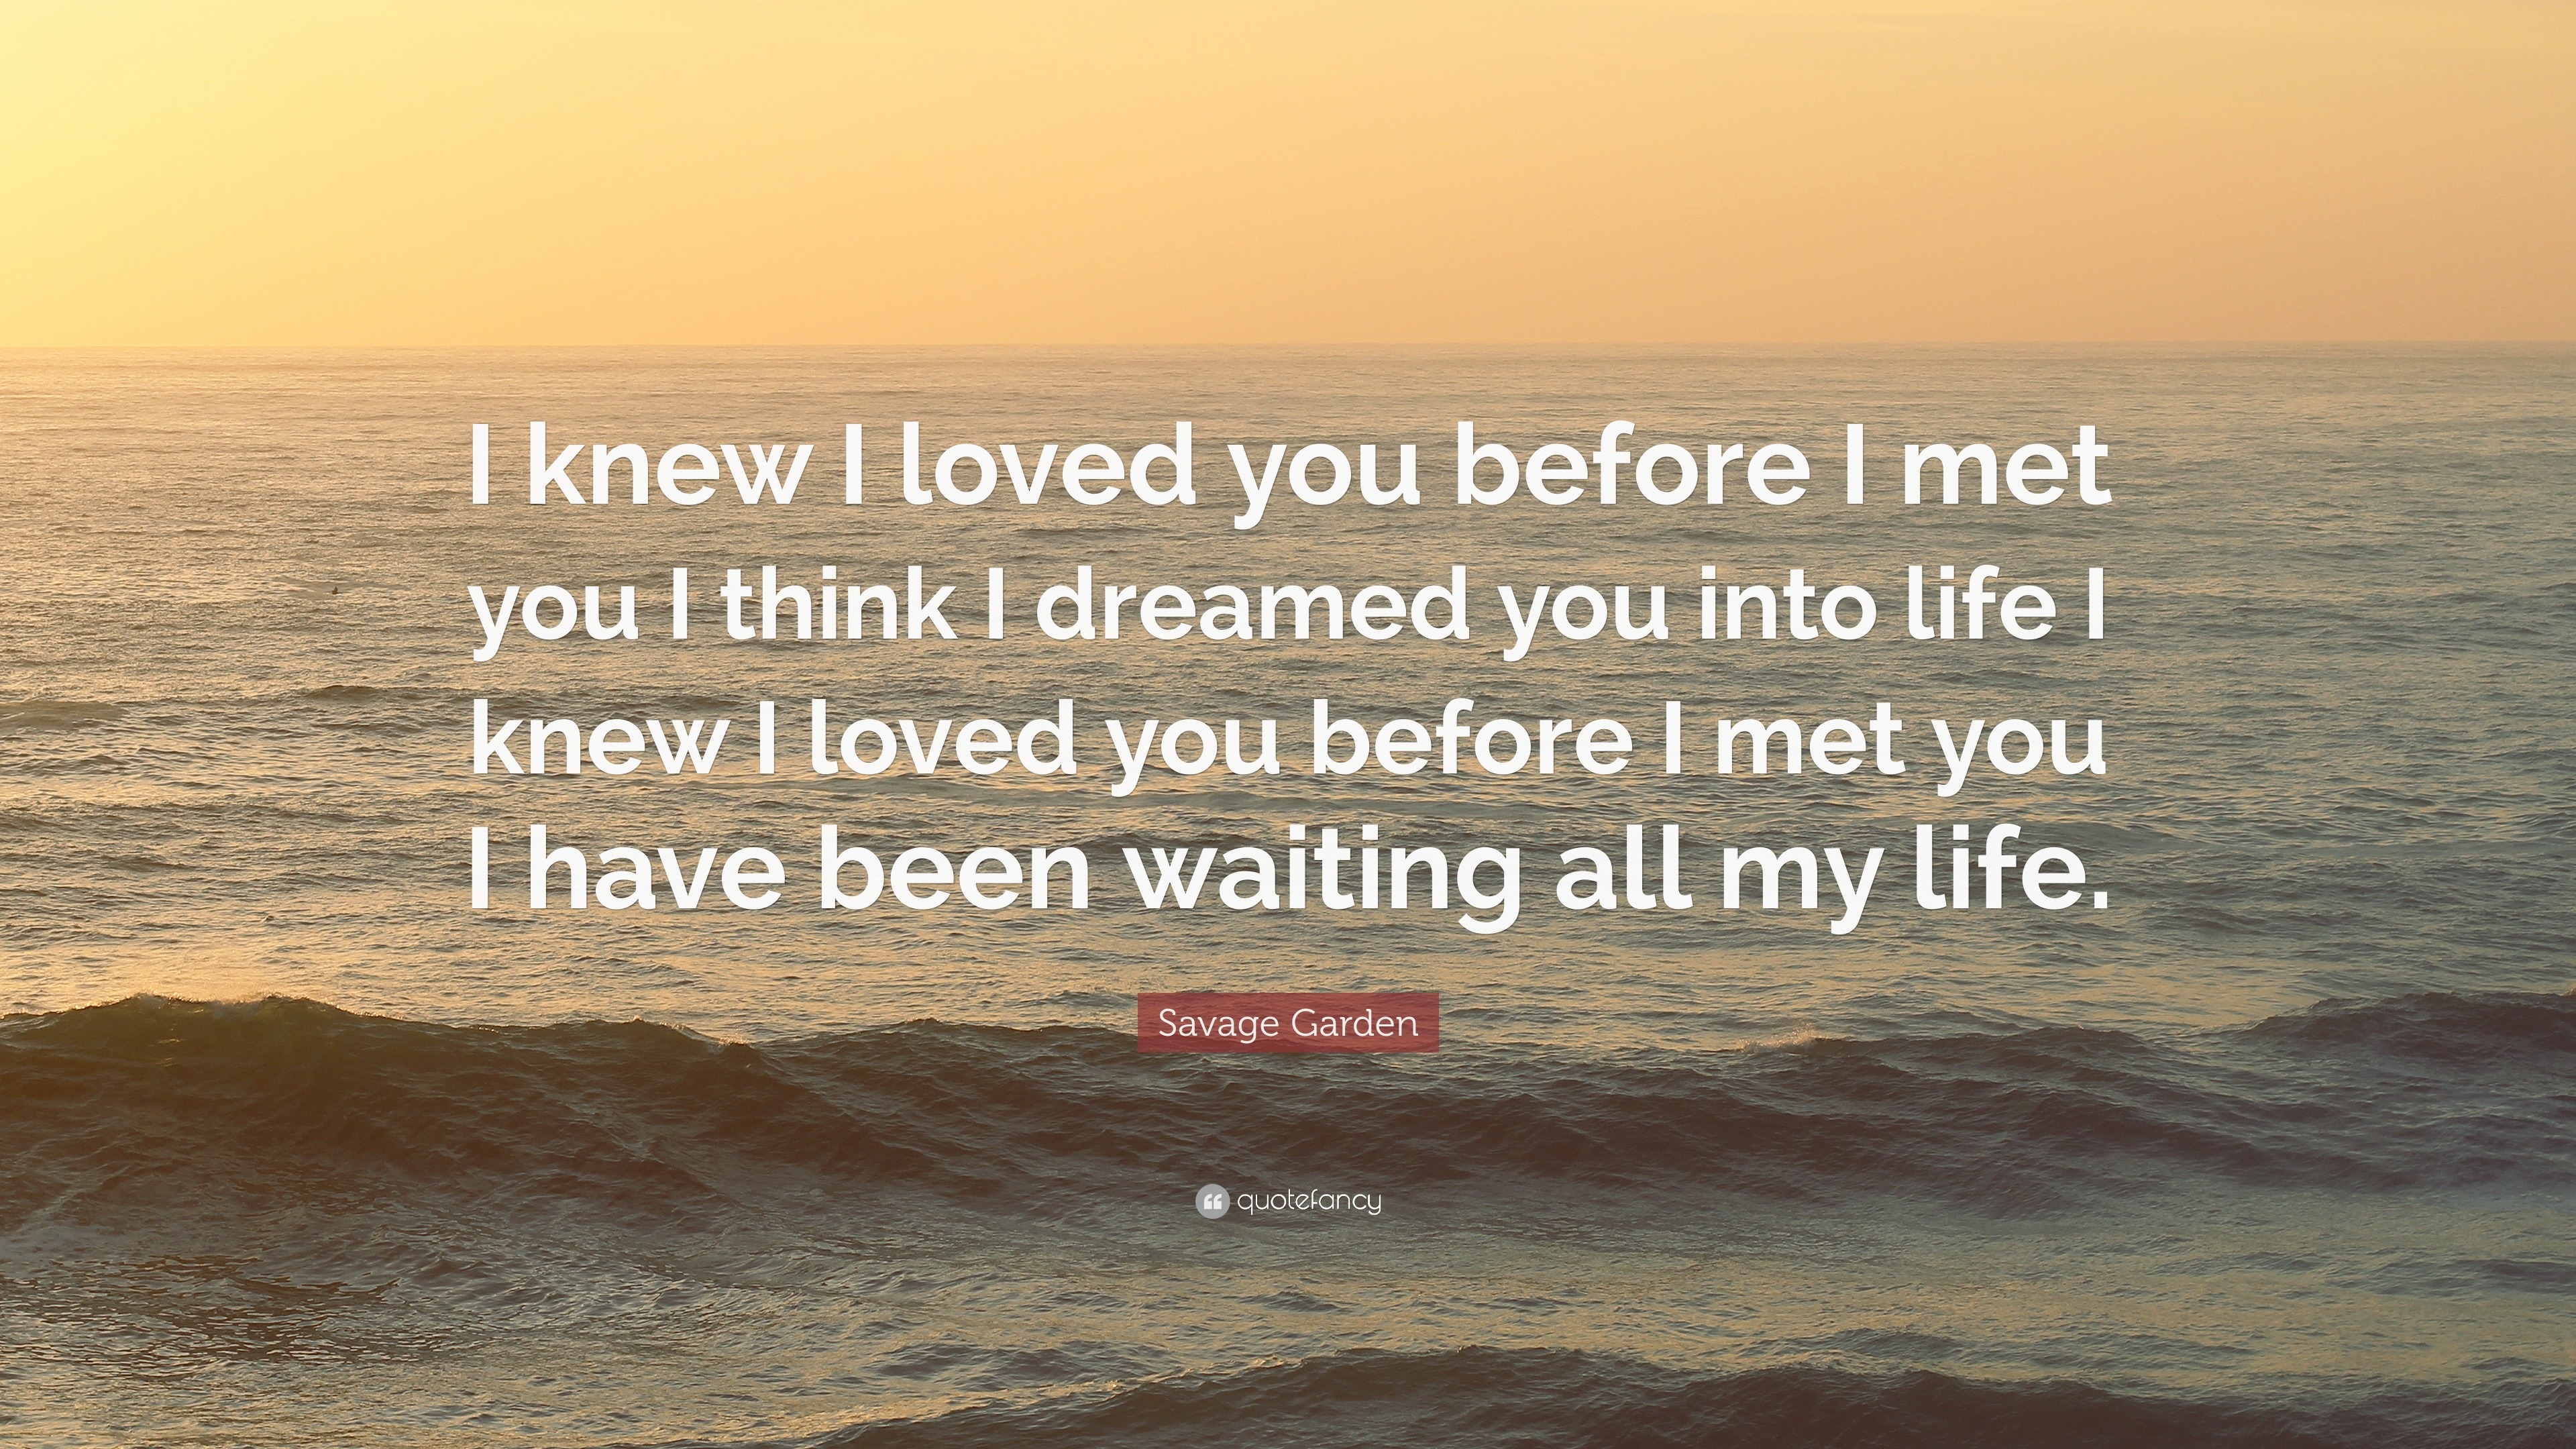 Savage Garden Quote: “I knew I loved you before I met you ...